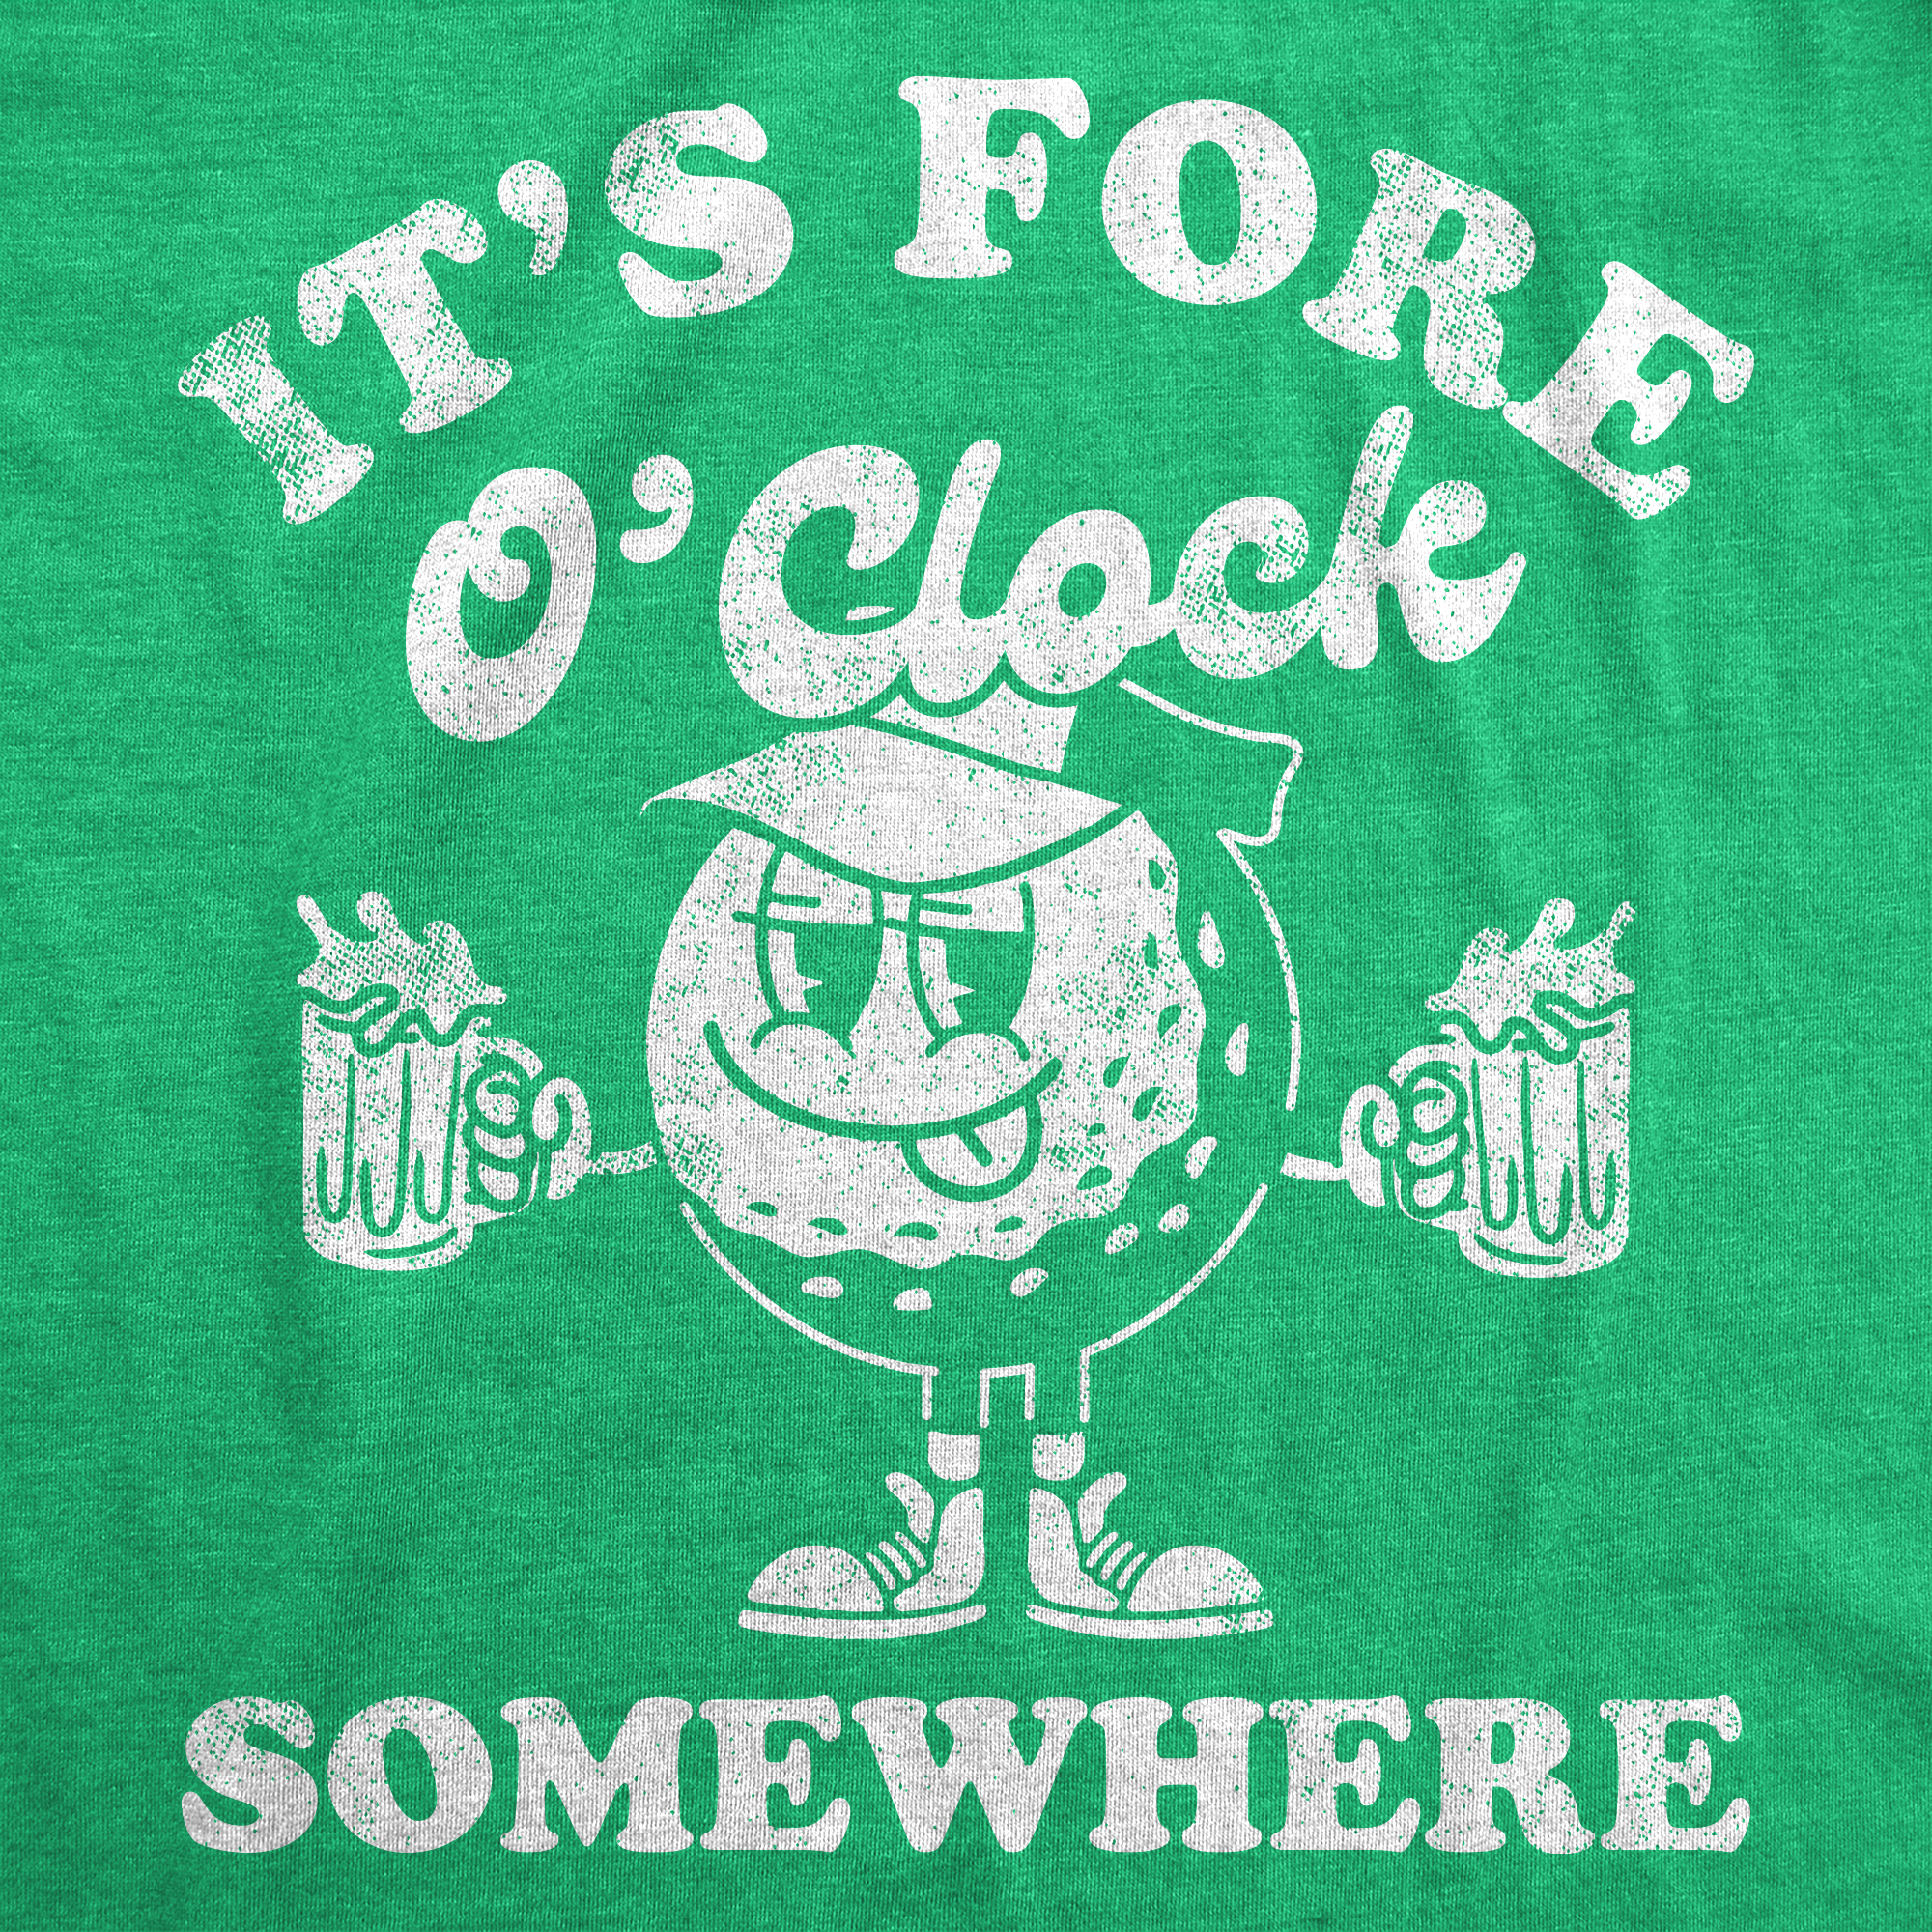 Funny Heather Green - Fore O Clock Somewhere Its Fore O Clock Somewhere Womens T Shirt Nerdy Golf Drinking Tee